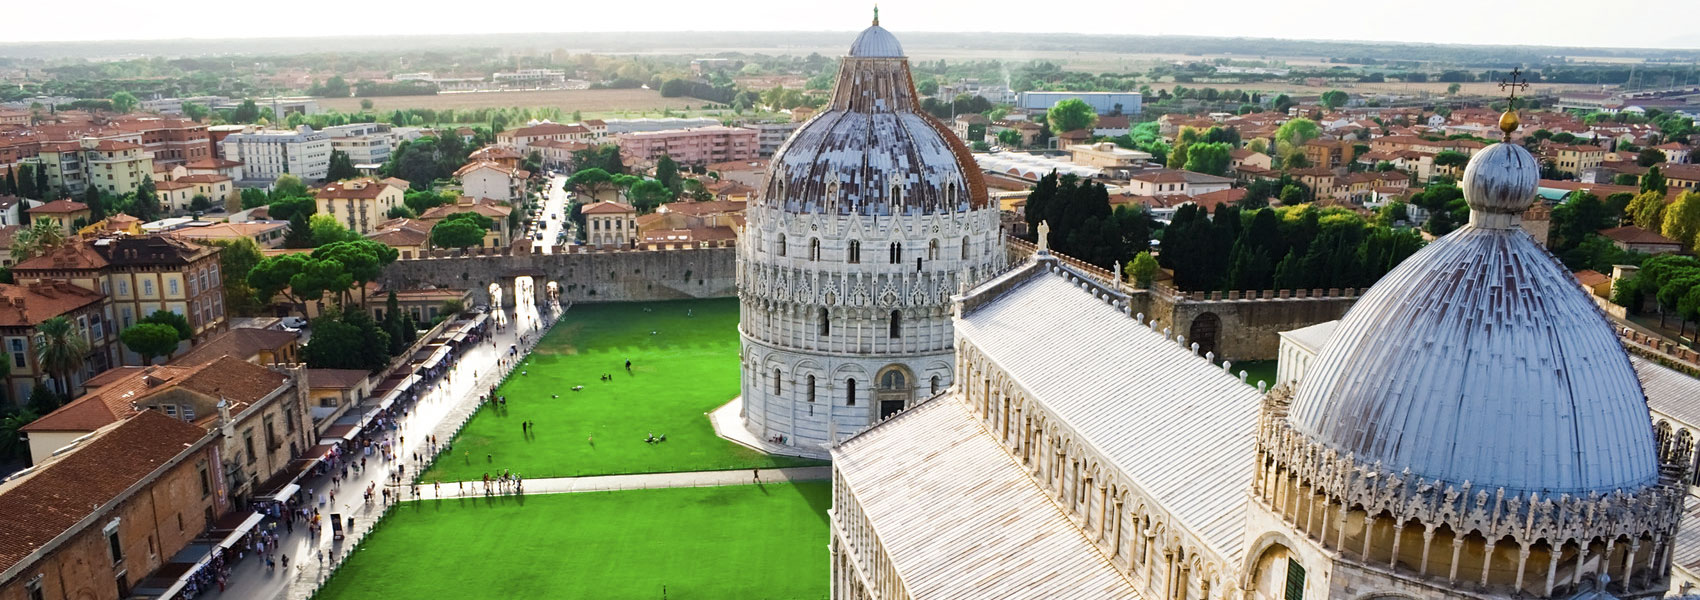 Pisa, Pasta and Chianti Wine Tour with Light Lunch from Montecatini